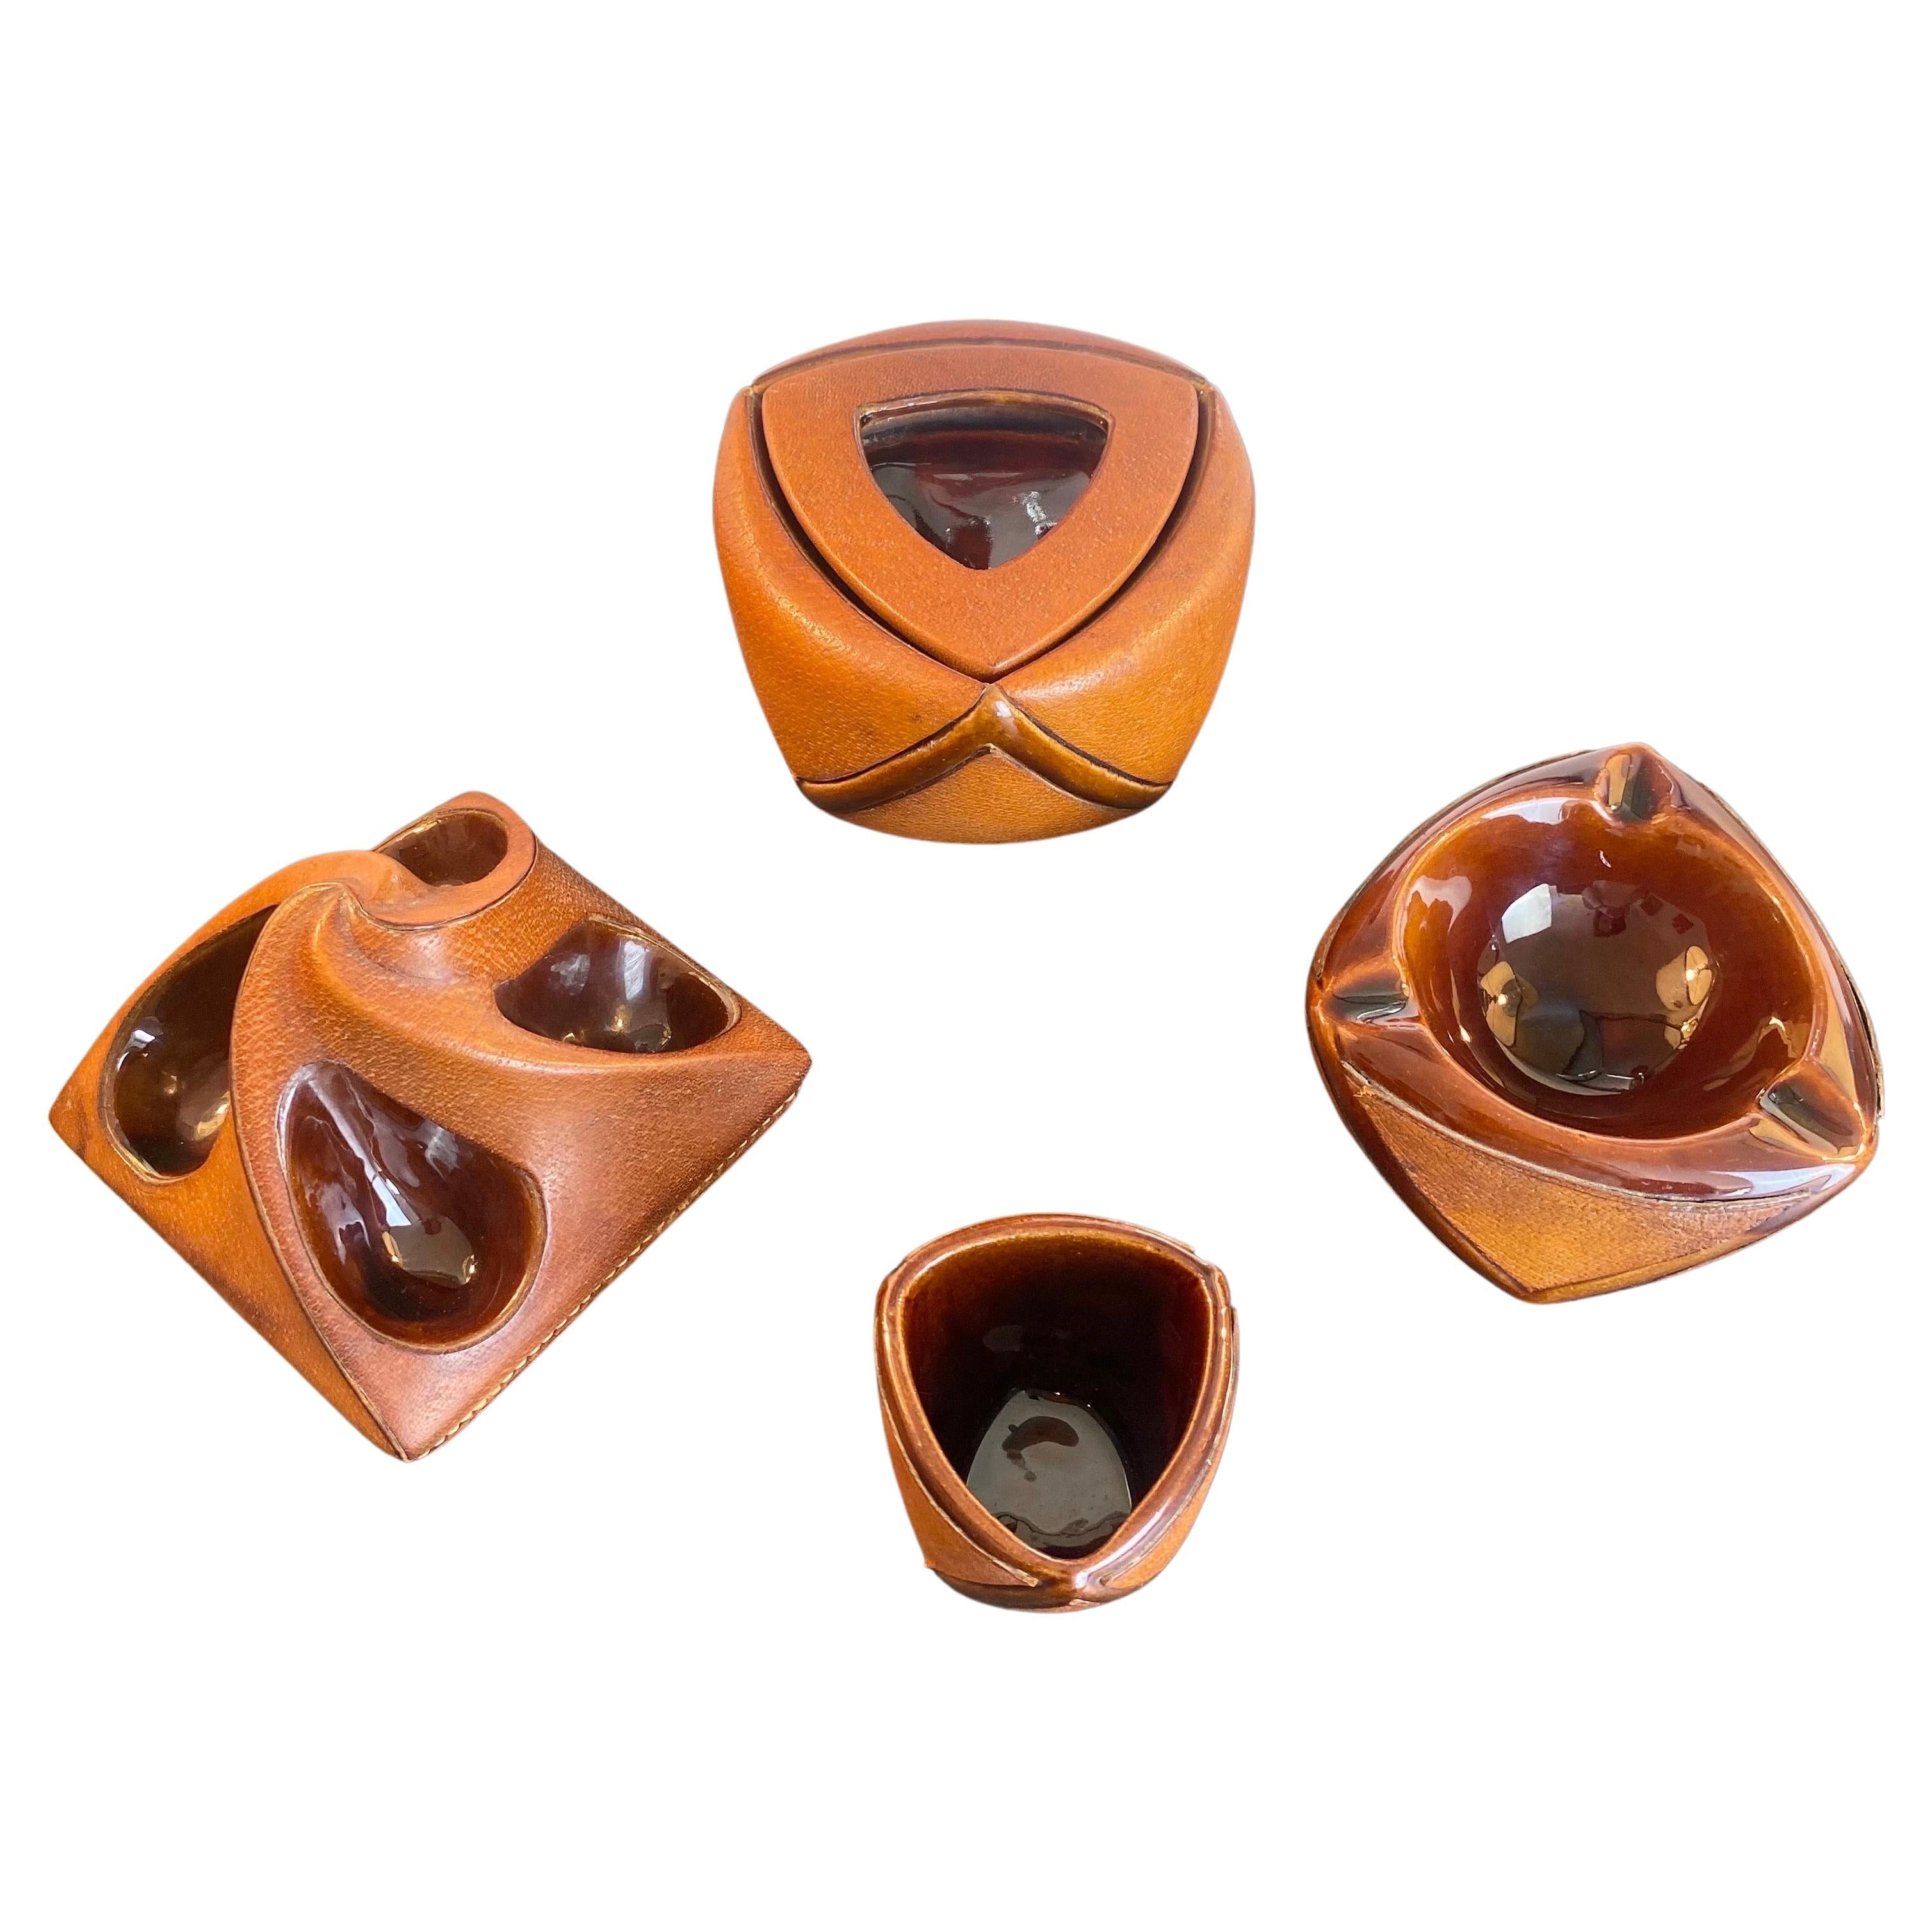 Smoker kit from the famous and luxurious Maison Longchamp.
Beautiful tan, camel, havana, brown color.
Comprising 4 pieces: an ashtray, a quadruple pipe holder, a tobacco jar and match jar.
Each piece is made of earthenware ceramic and brown